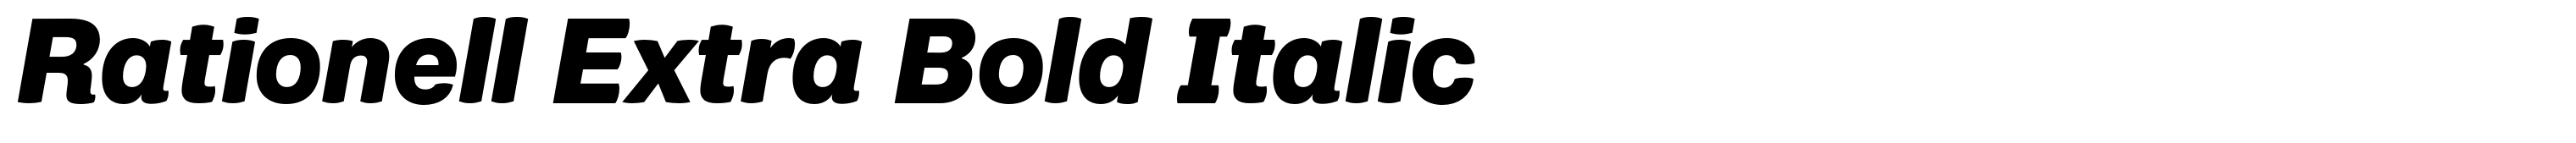 Rationell Extra Bold Italic